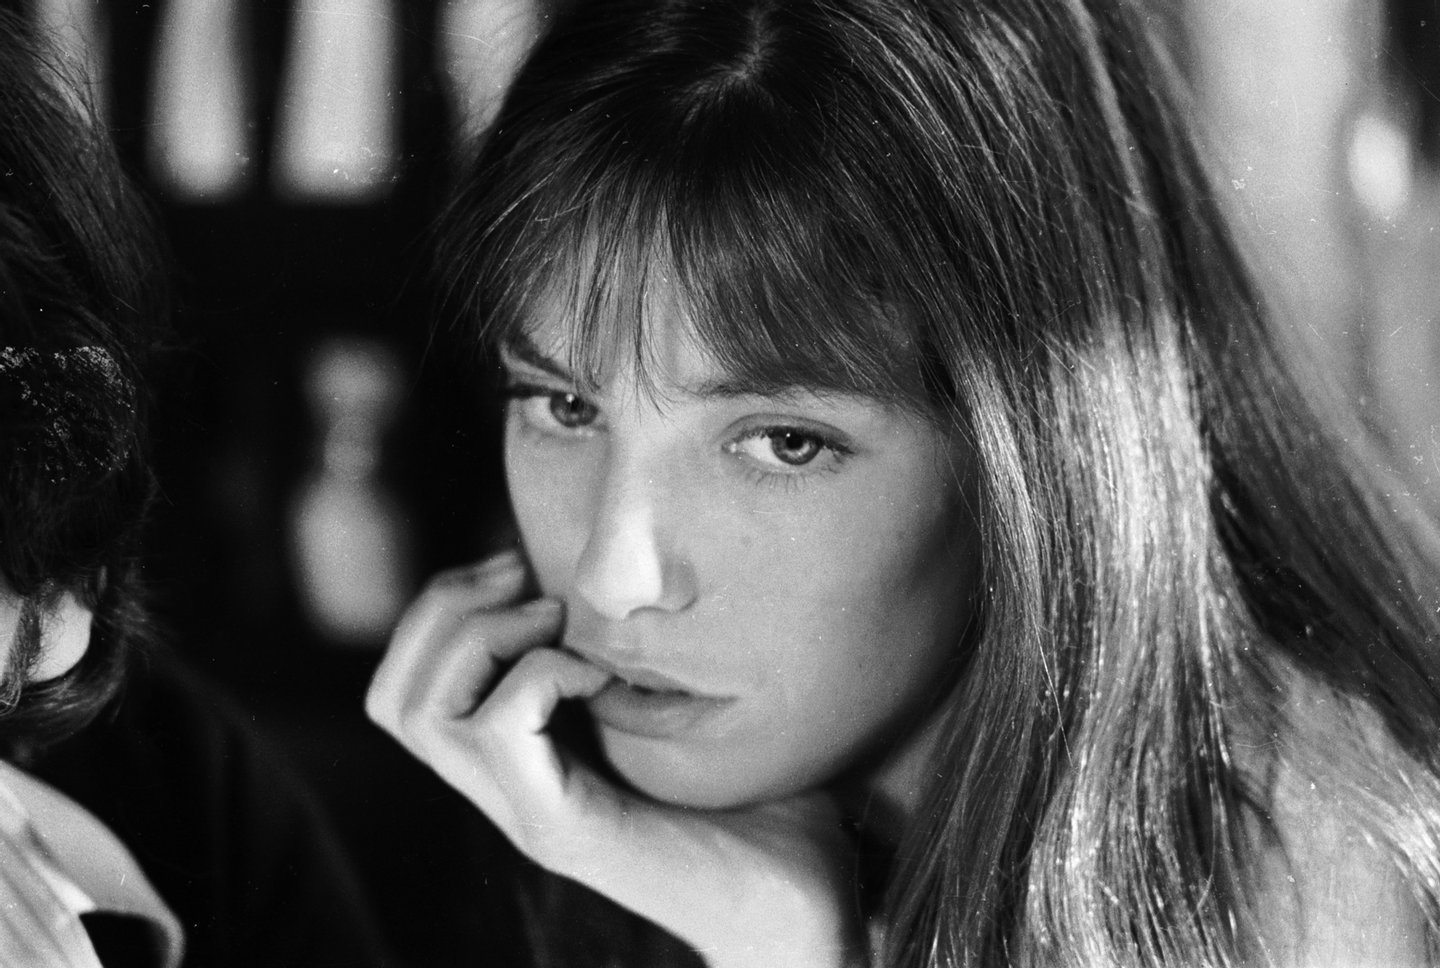 1975: British singer, actress and model Jane Birkin who plays the title role in the comedy 'Catherine et Cie', aka Catherine & Co., directed by Michel Boisrond. (Photo by Keystone/Getty Images)